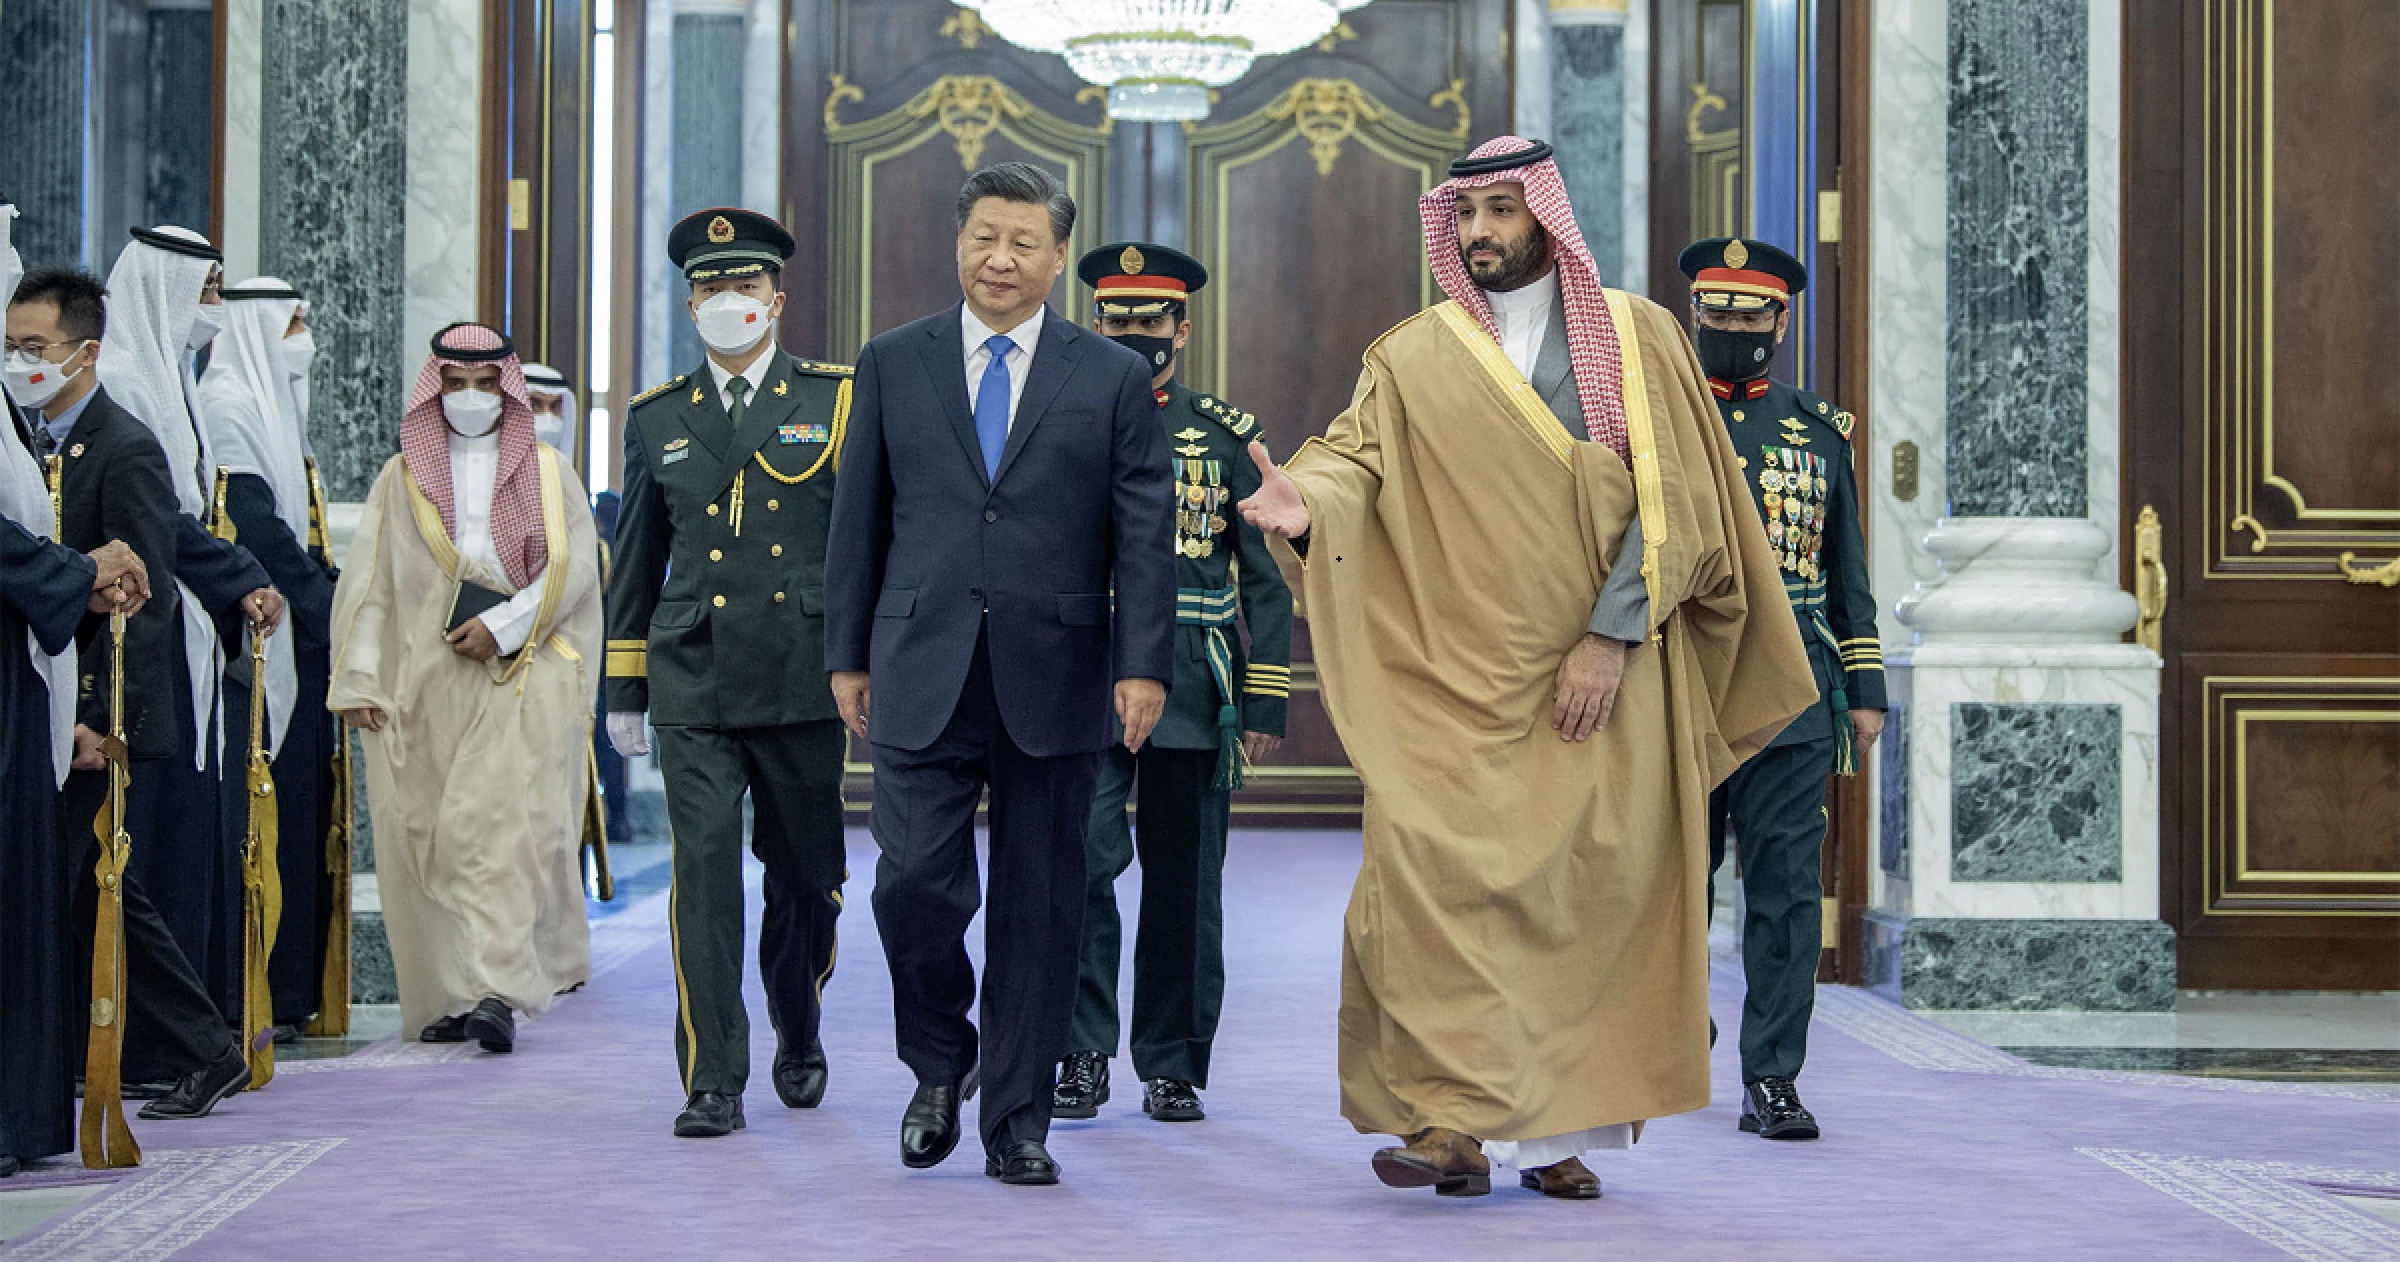 China is the “strategic partner” of the Gulf countries.  Xi Jinping signs 34 agreements with the Saudis.  Oil, infrastructure and information technology in the key anti-US